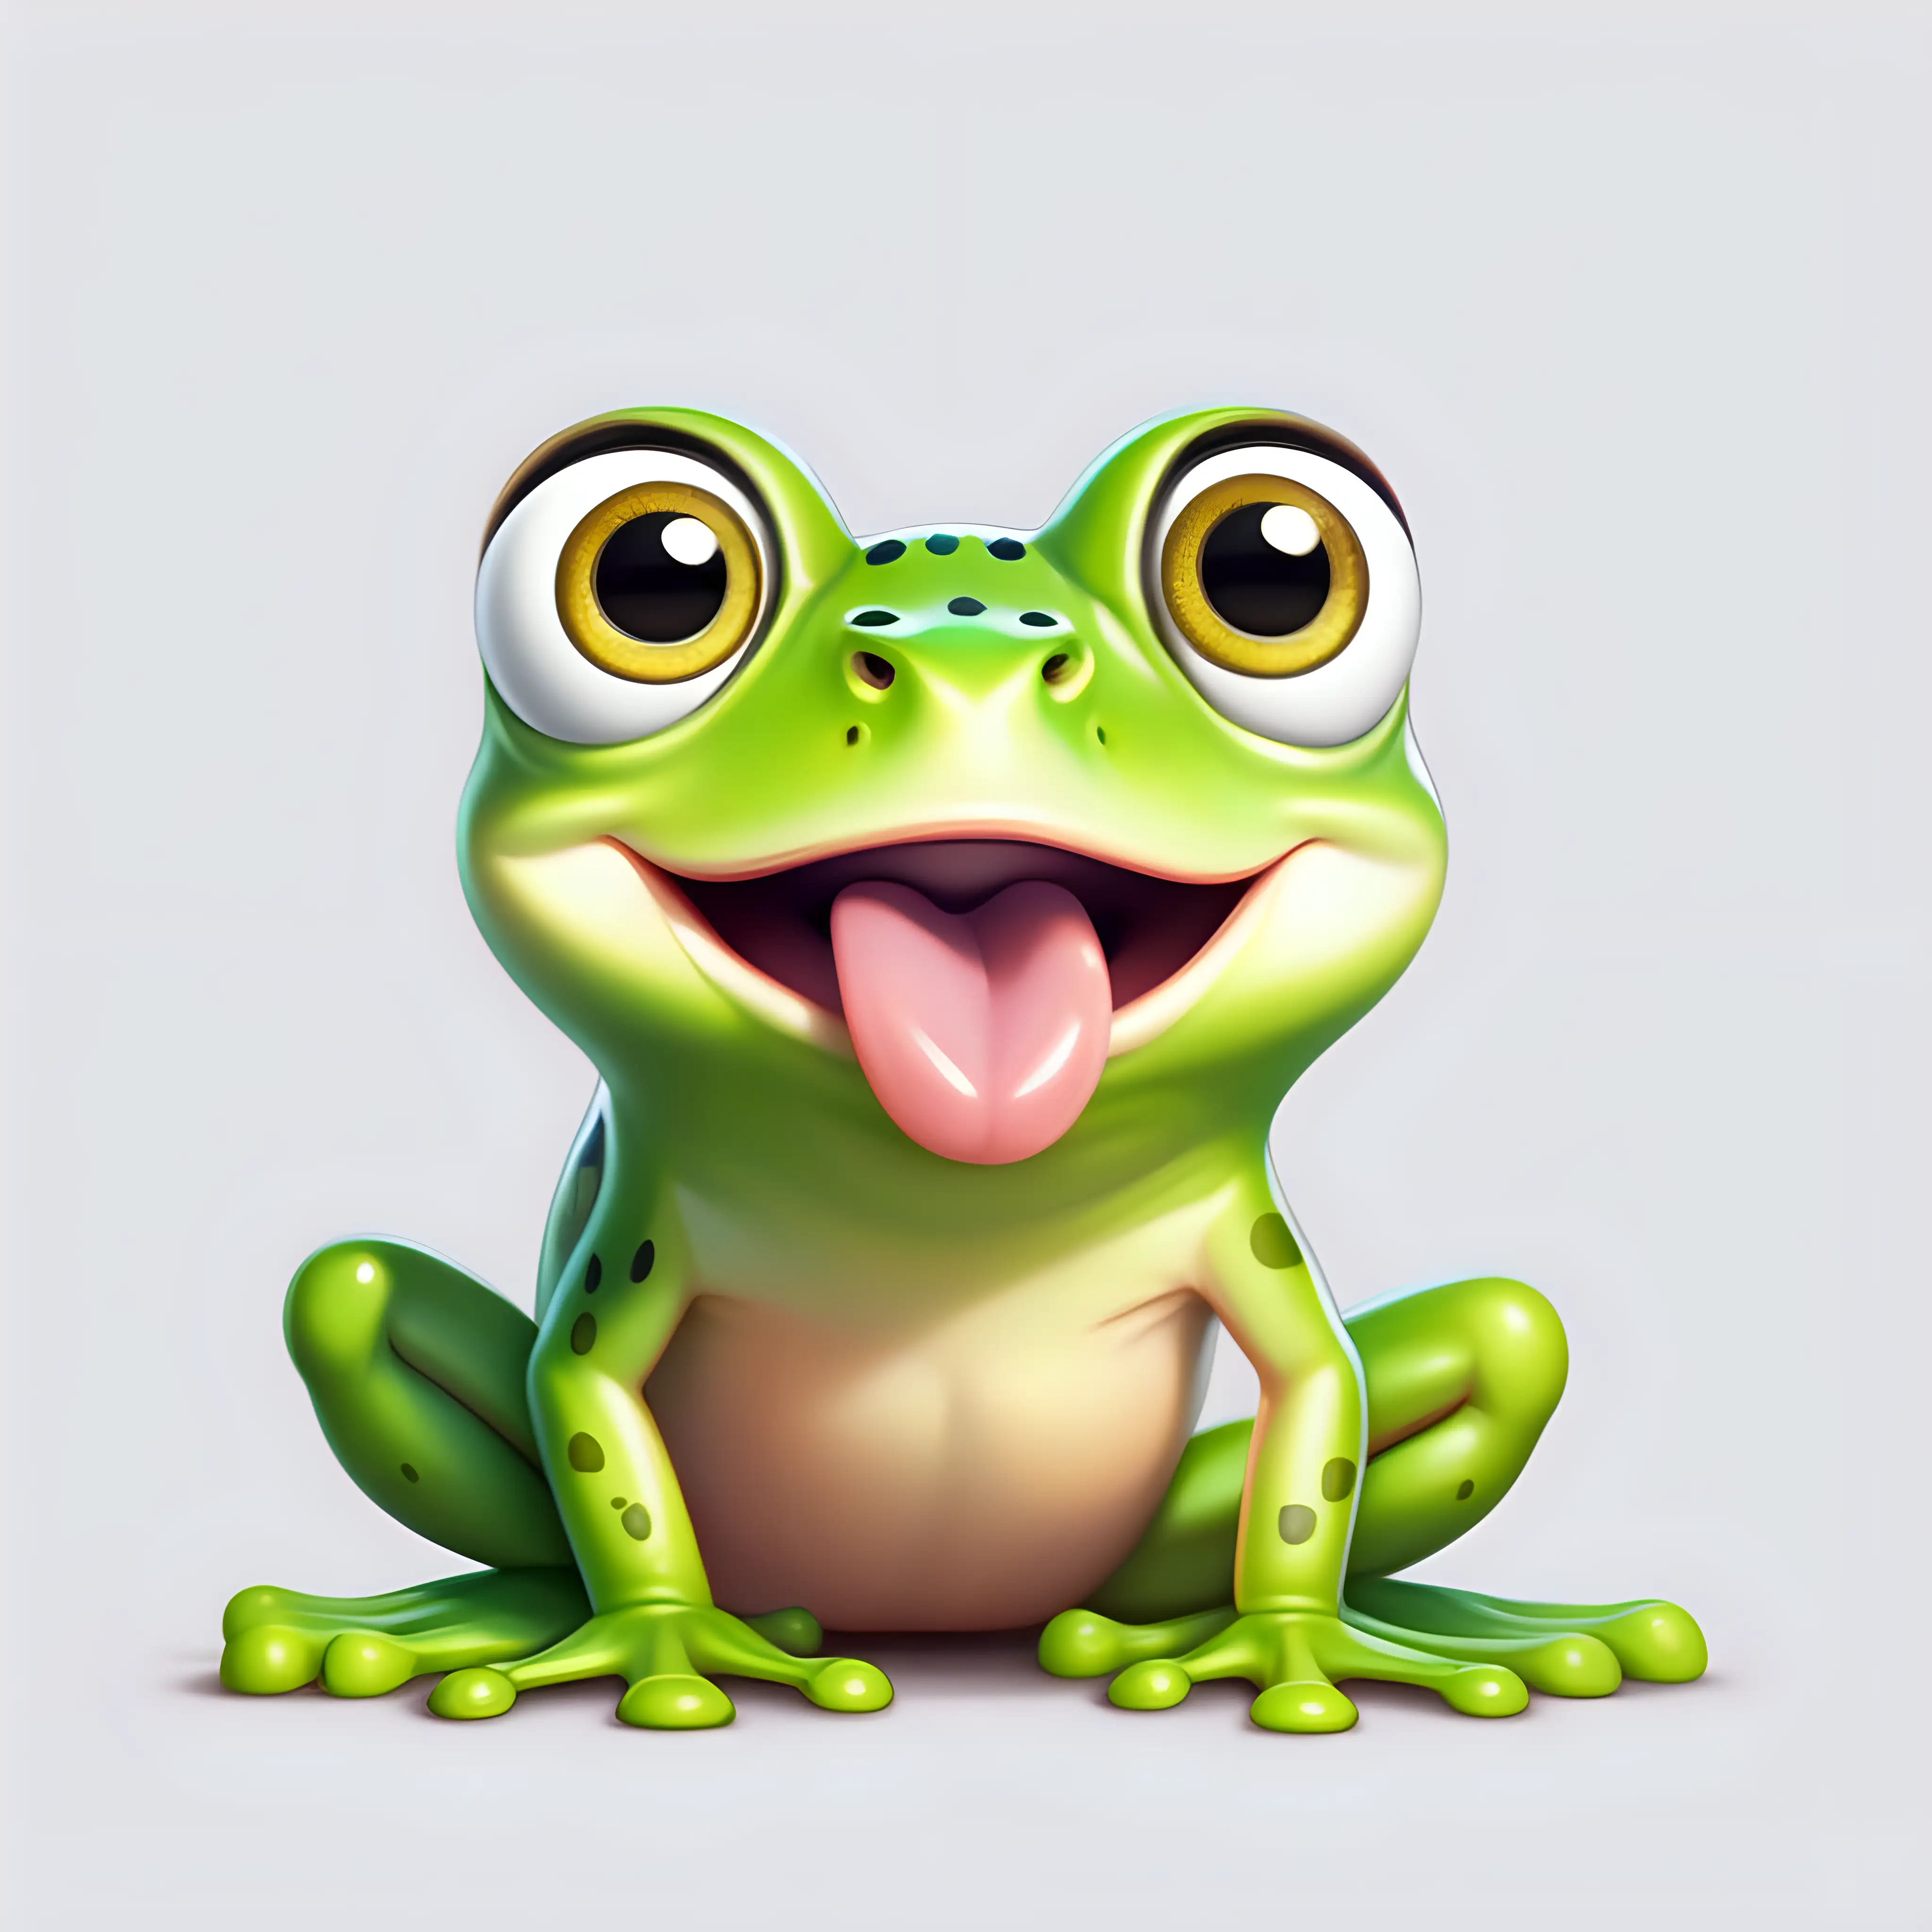 Playful PixarStyle Green Frog with Tongue Sticking Out